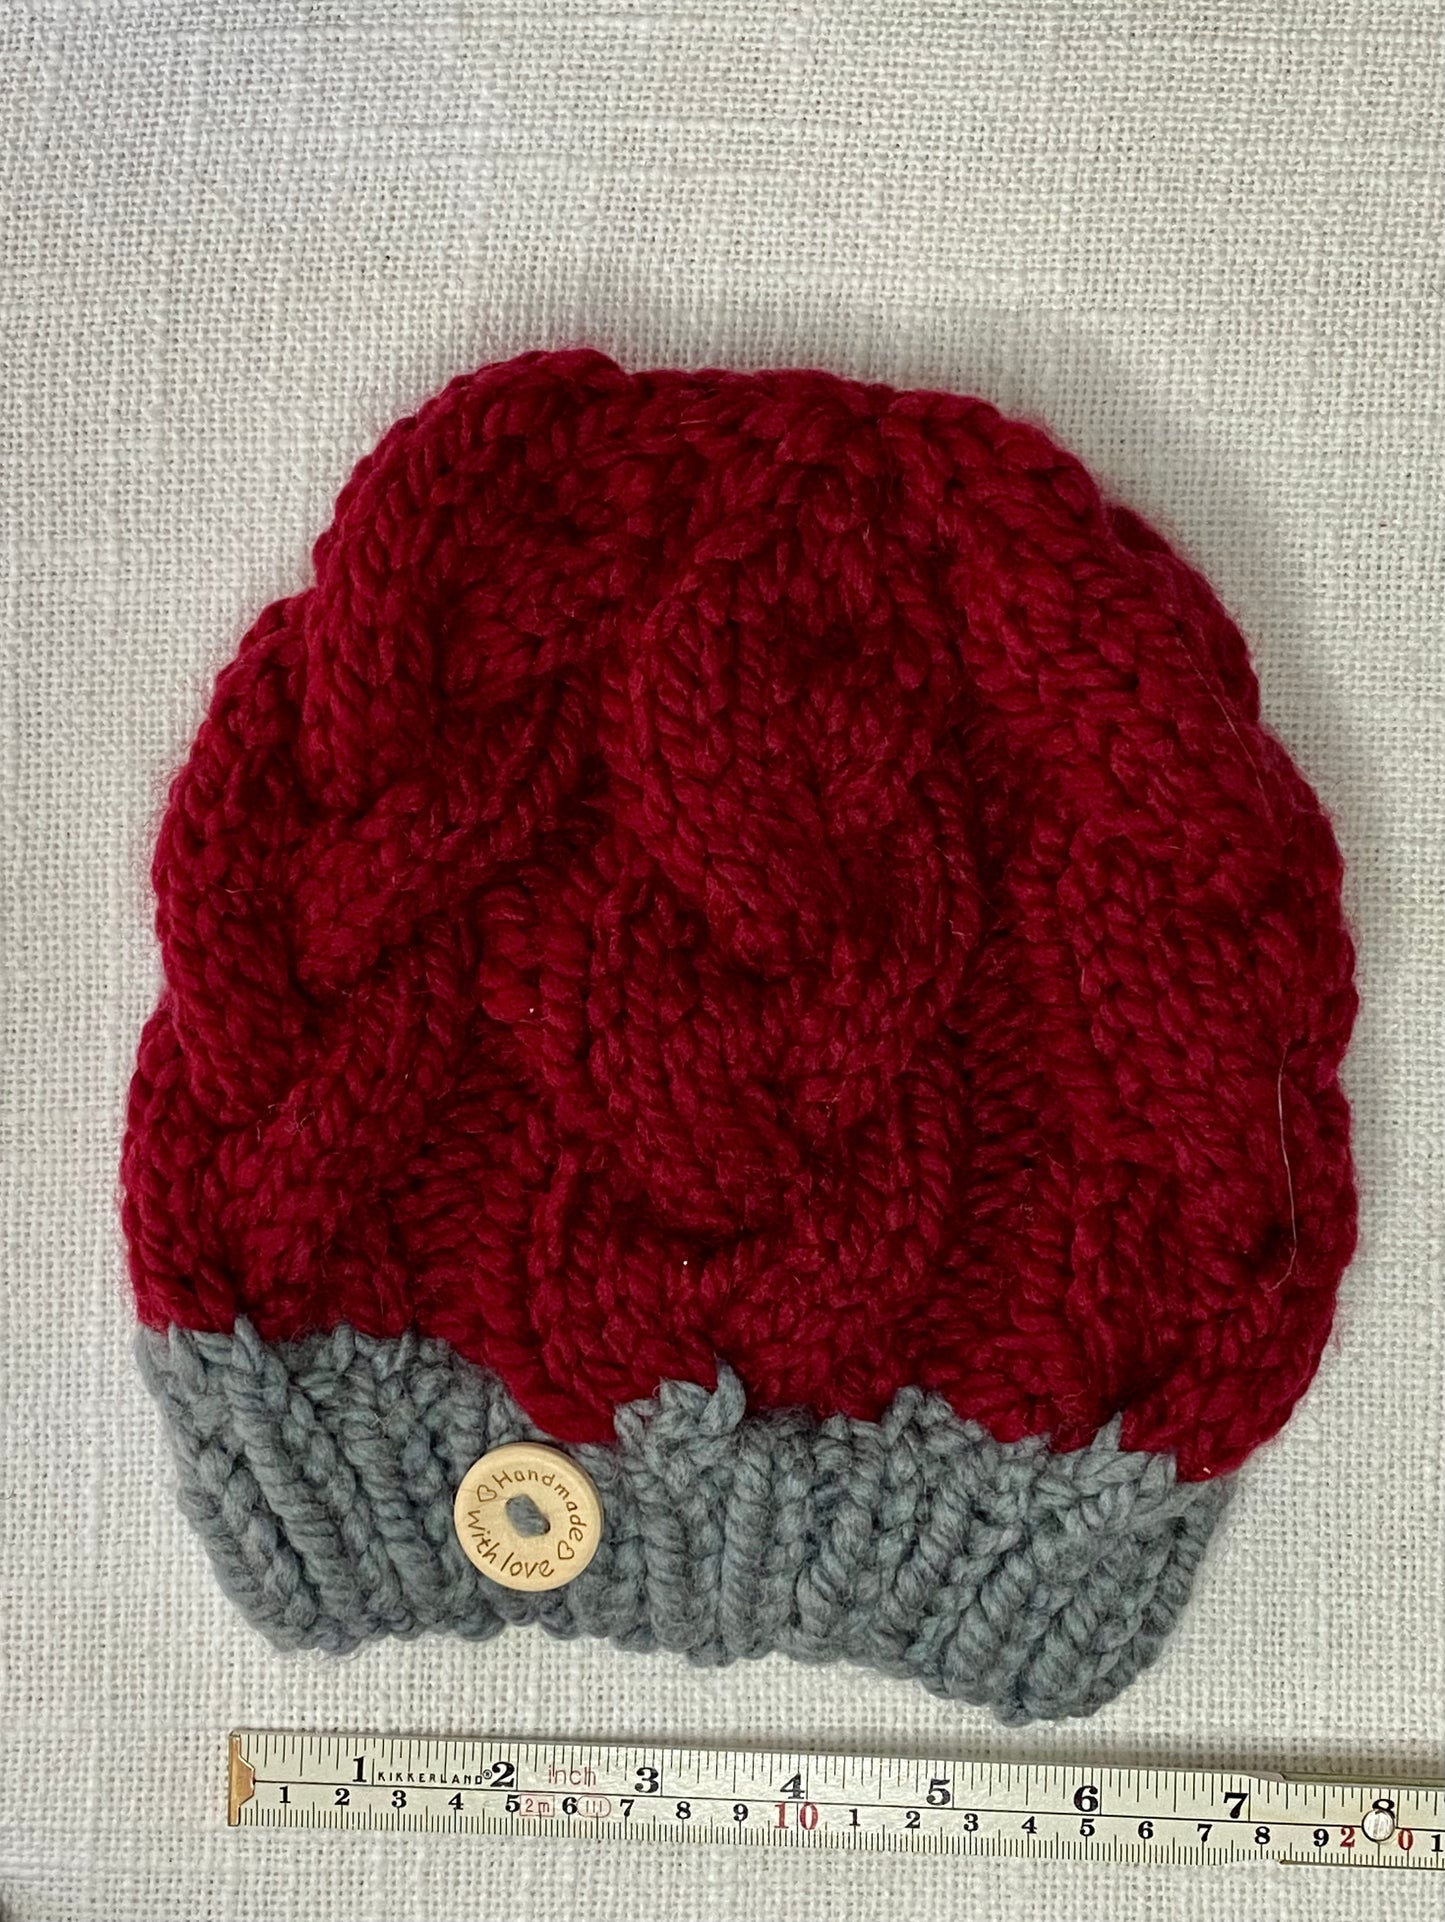 Cozy Cables Hat in Cranberry and Pewter- Wool Blend Fiber - Dual Tone